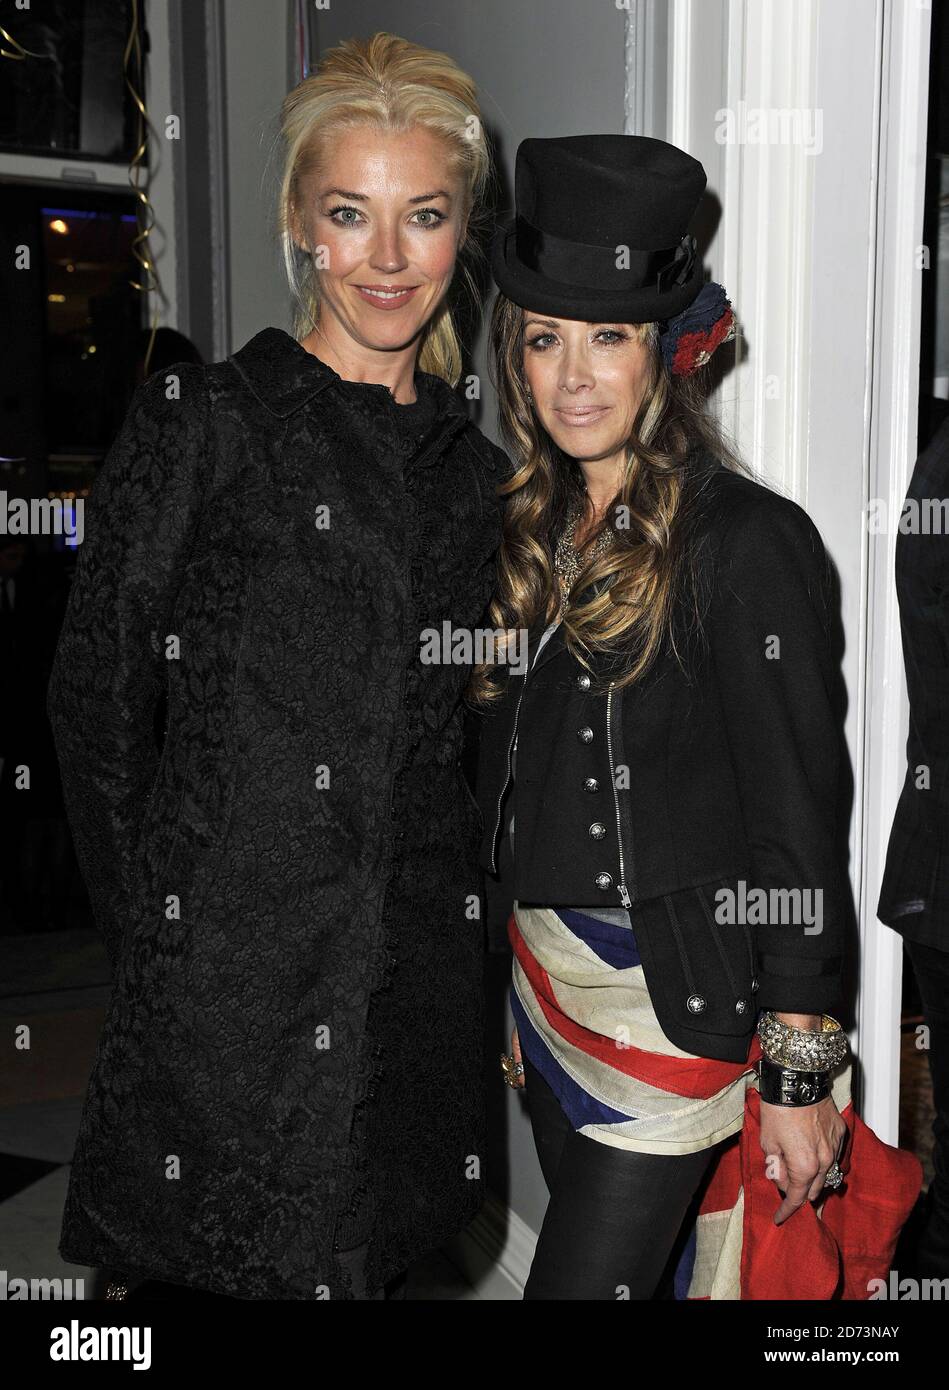 Tamara Beckwith (l) and Gela Nash-Taylor attending the launch party for Juicy Couture's flagship store in central London. Stock Photo